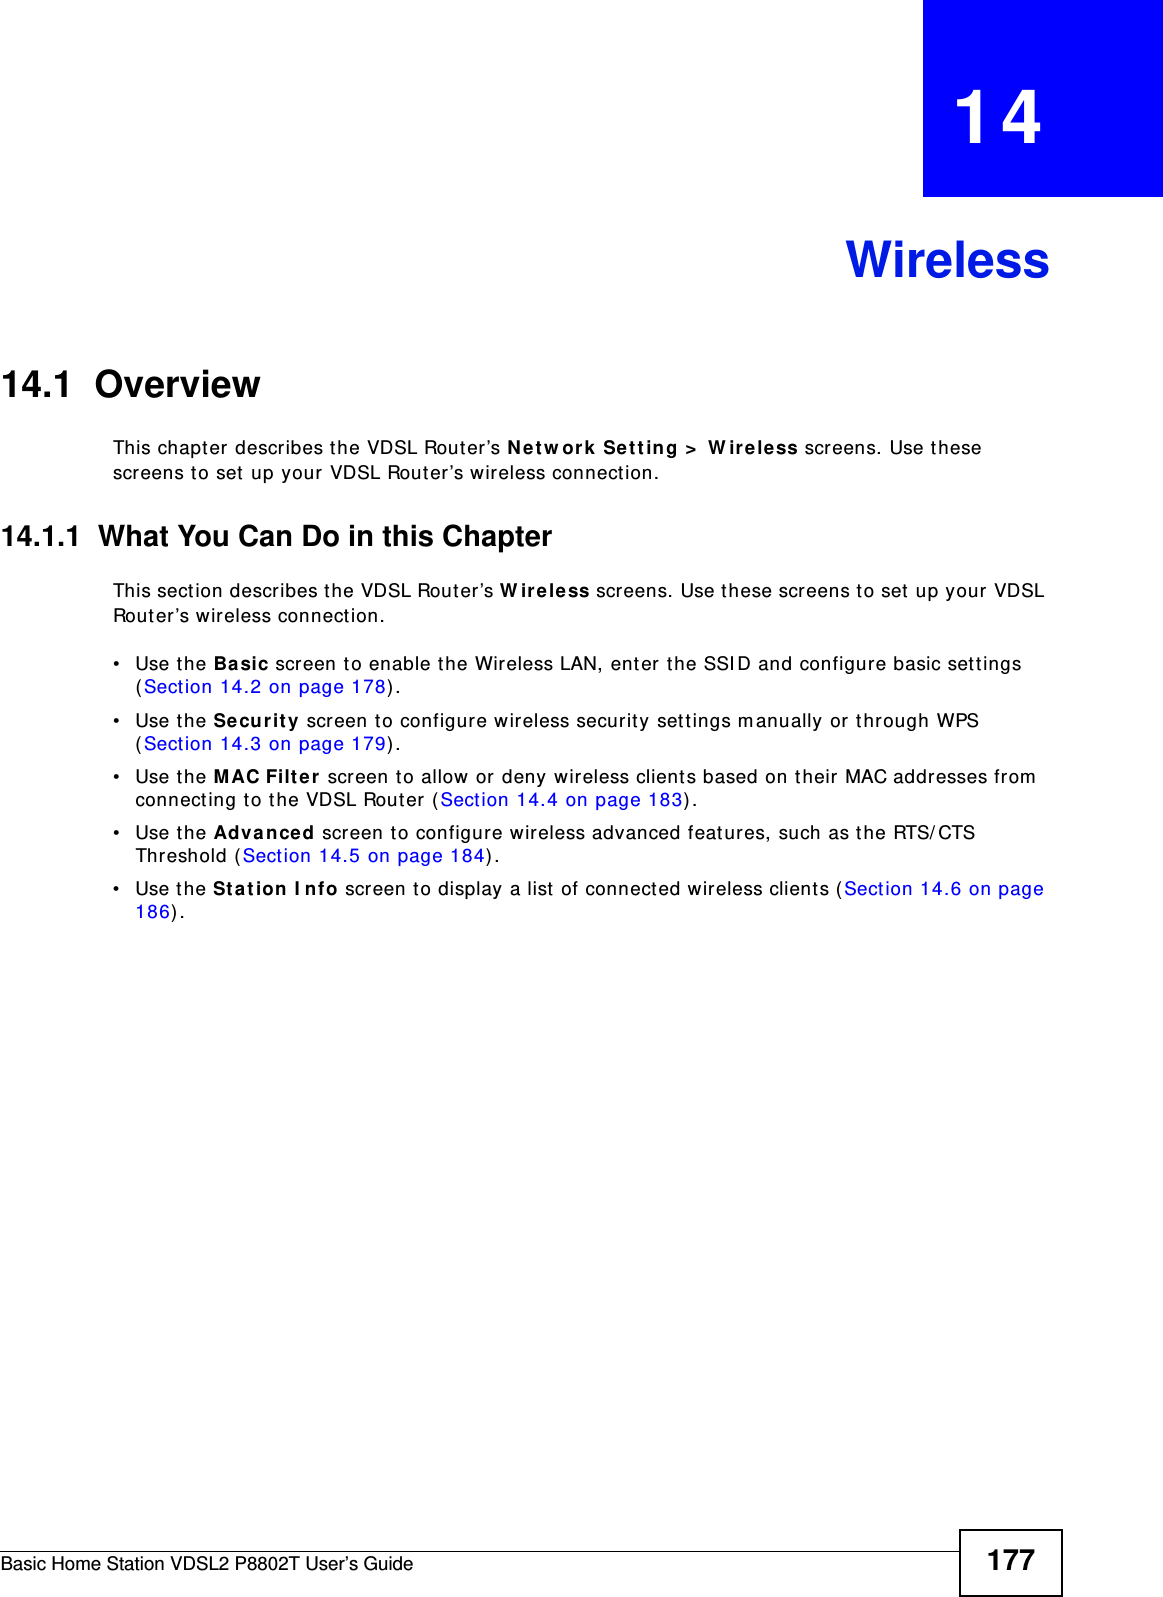 Basic Home Station VDSL2 P8802T User’s Guide 177CHAPTER   14Wireless14.1  Overview This chapt er describes t he VDSL Router’s N e t w or k Set t ing &gt;  W ire less screens. Use t hese screens to set up your VDSL Router’s wireless connection.14.1.1  What You Can Do in this ChapterThis sect ion describes t he VDSL Router’s W ir ele ss scr eens. Use t hese screens t o set  up your  VDSL Router’s wireless connect ion.• Use the Ba sic screen t o enable the Wireless LAN, enter the SSI D and configure basic sett ings (Sect ion 14.2 on page 178) .• Use the Se curity screen to configure wireless security set tings m anually or t hrough WPS (Sect ion 14.3 on page 179) .• Use the M AC Filt er  screen t o allow or deny wireless client s based on t heir MAC addresses from connect ing t o t he VDSL Router (Sect ion 14.4 on page 183) .• Use the Advanced screen t o configure wireless advanced feat ures, such as t he RTS/ CTS Threshold ( Section 14.5 on page 184) .• Use the Stat ion I n fo screen t o display a list  of connect ed wireless client s (Sect ion 14.6 on page 186) .